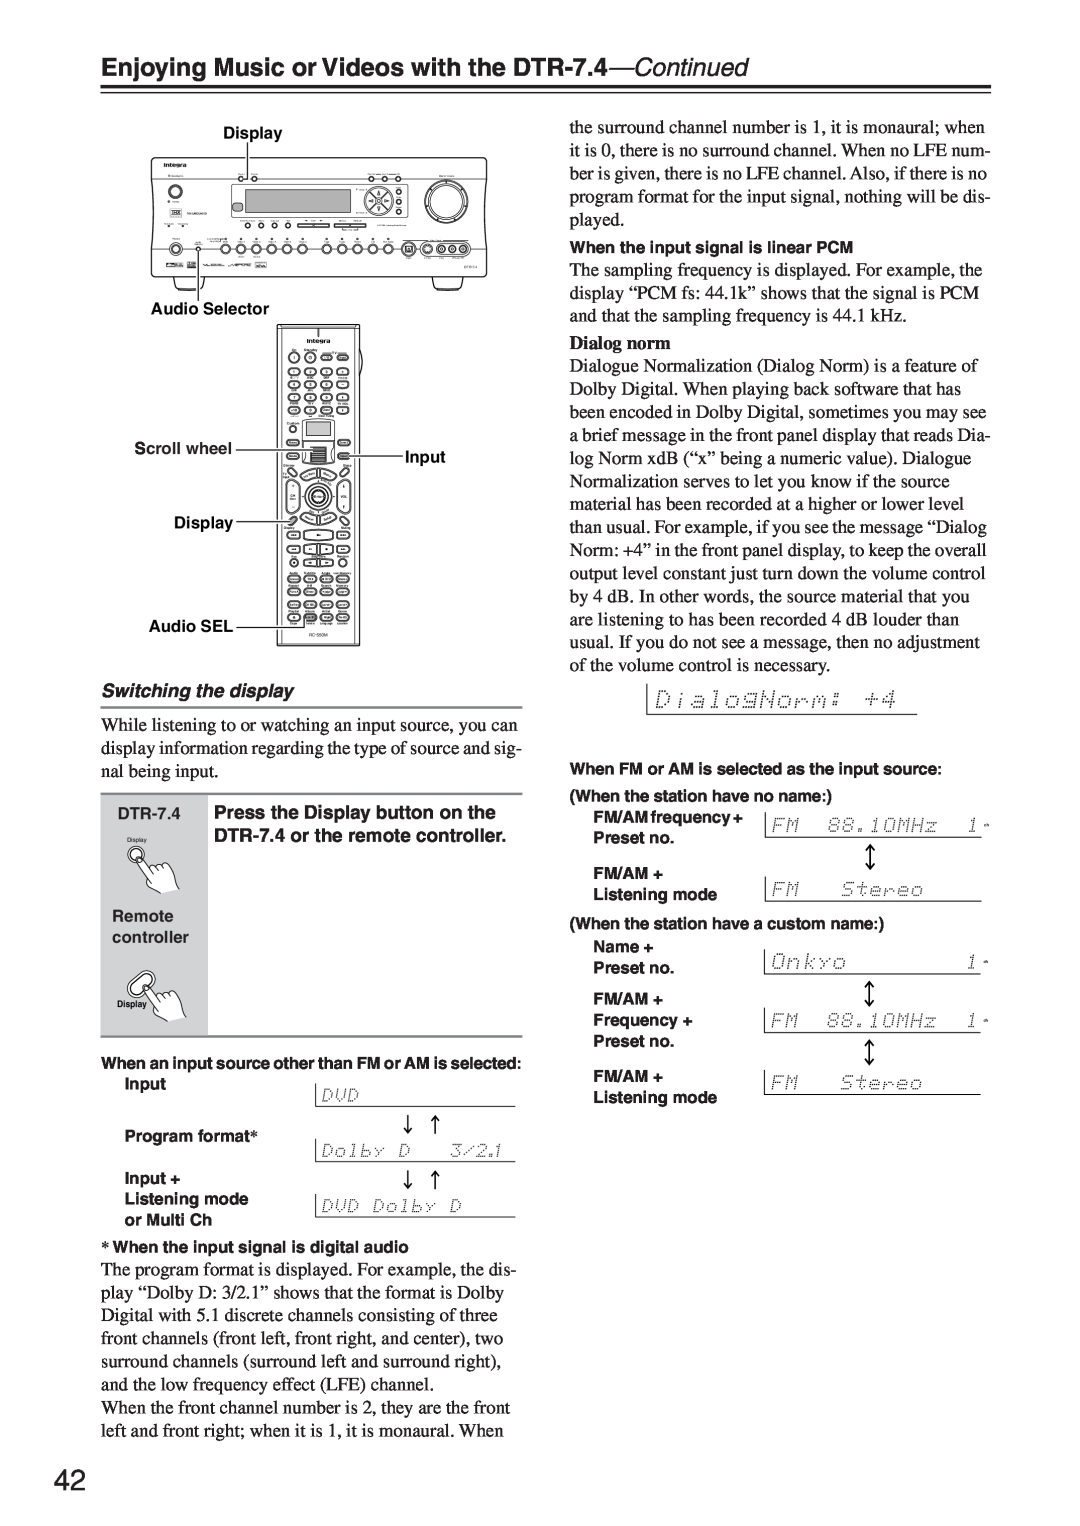 Integra DTR-7.4 instruction manual Dialog norm, Switching the display 